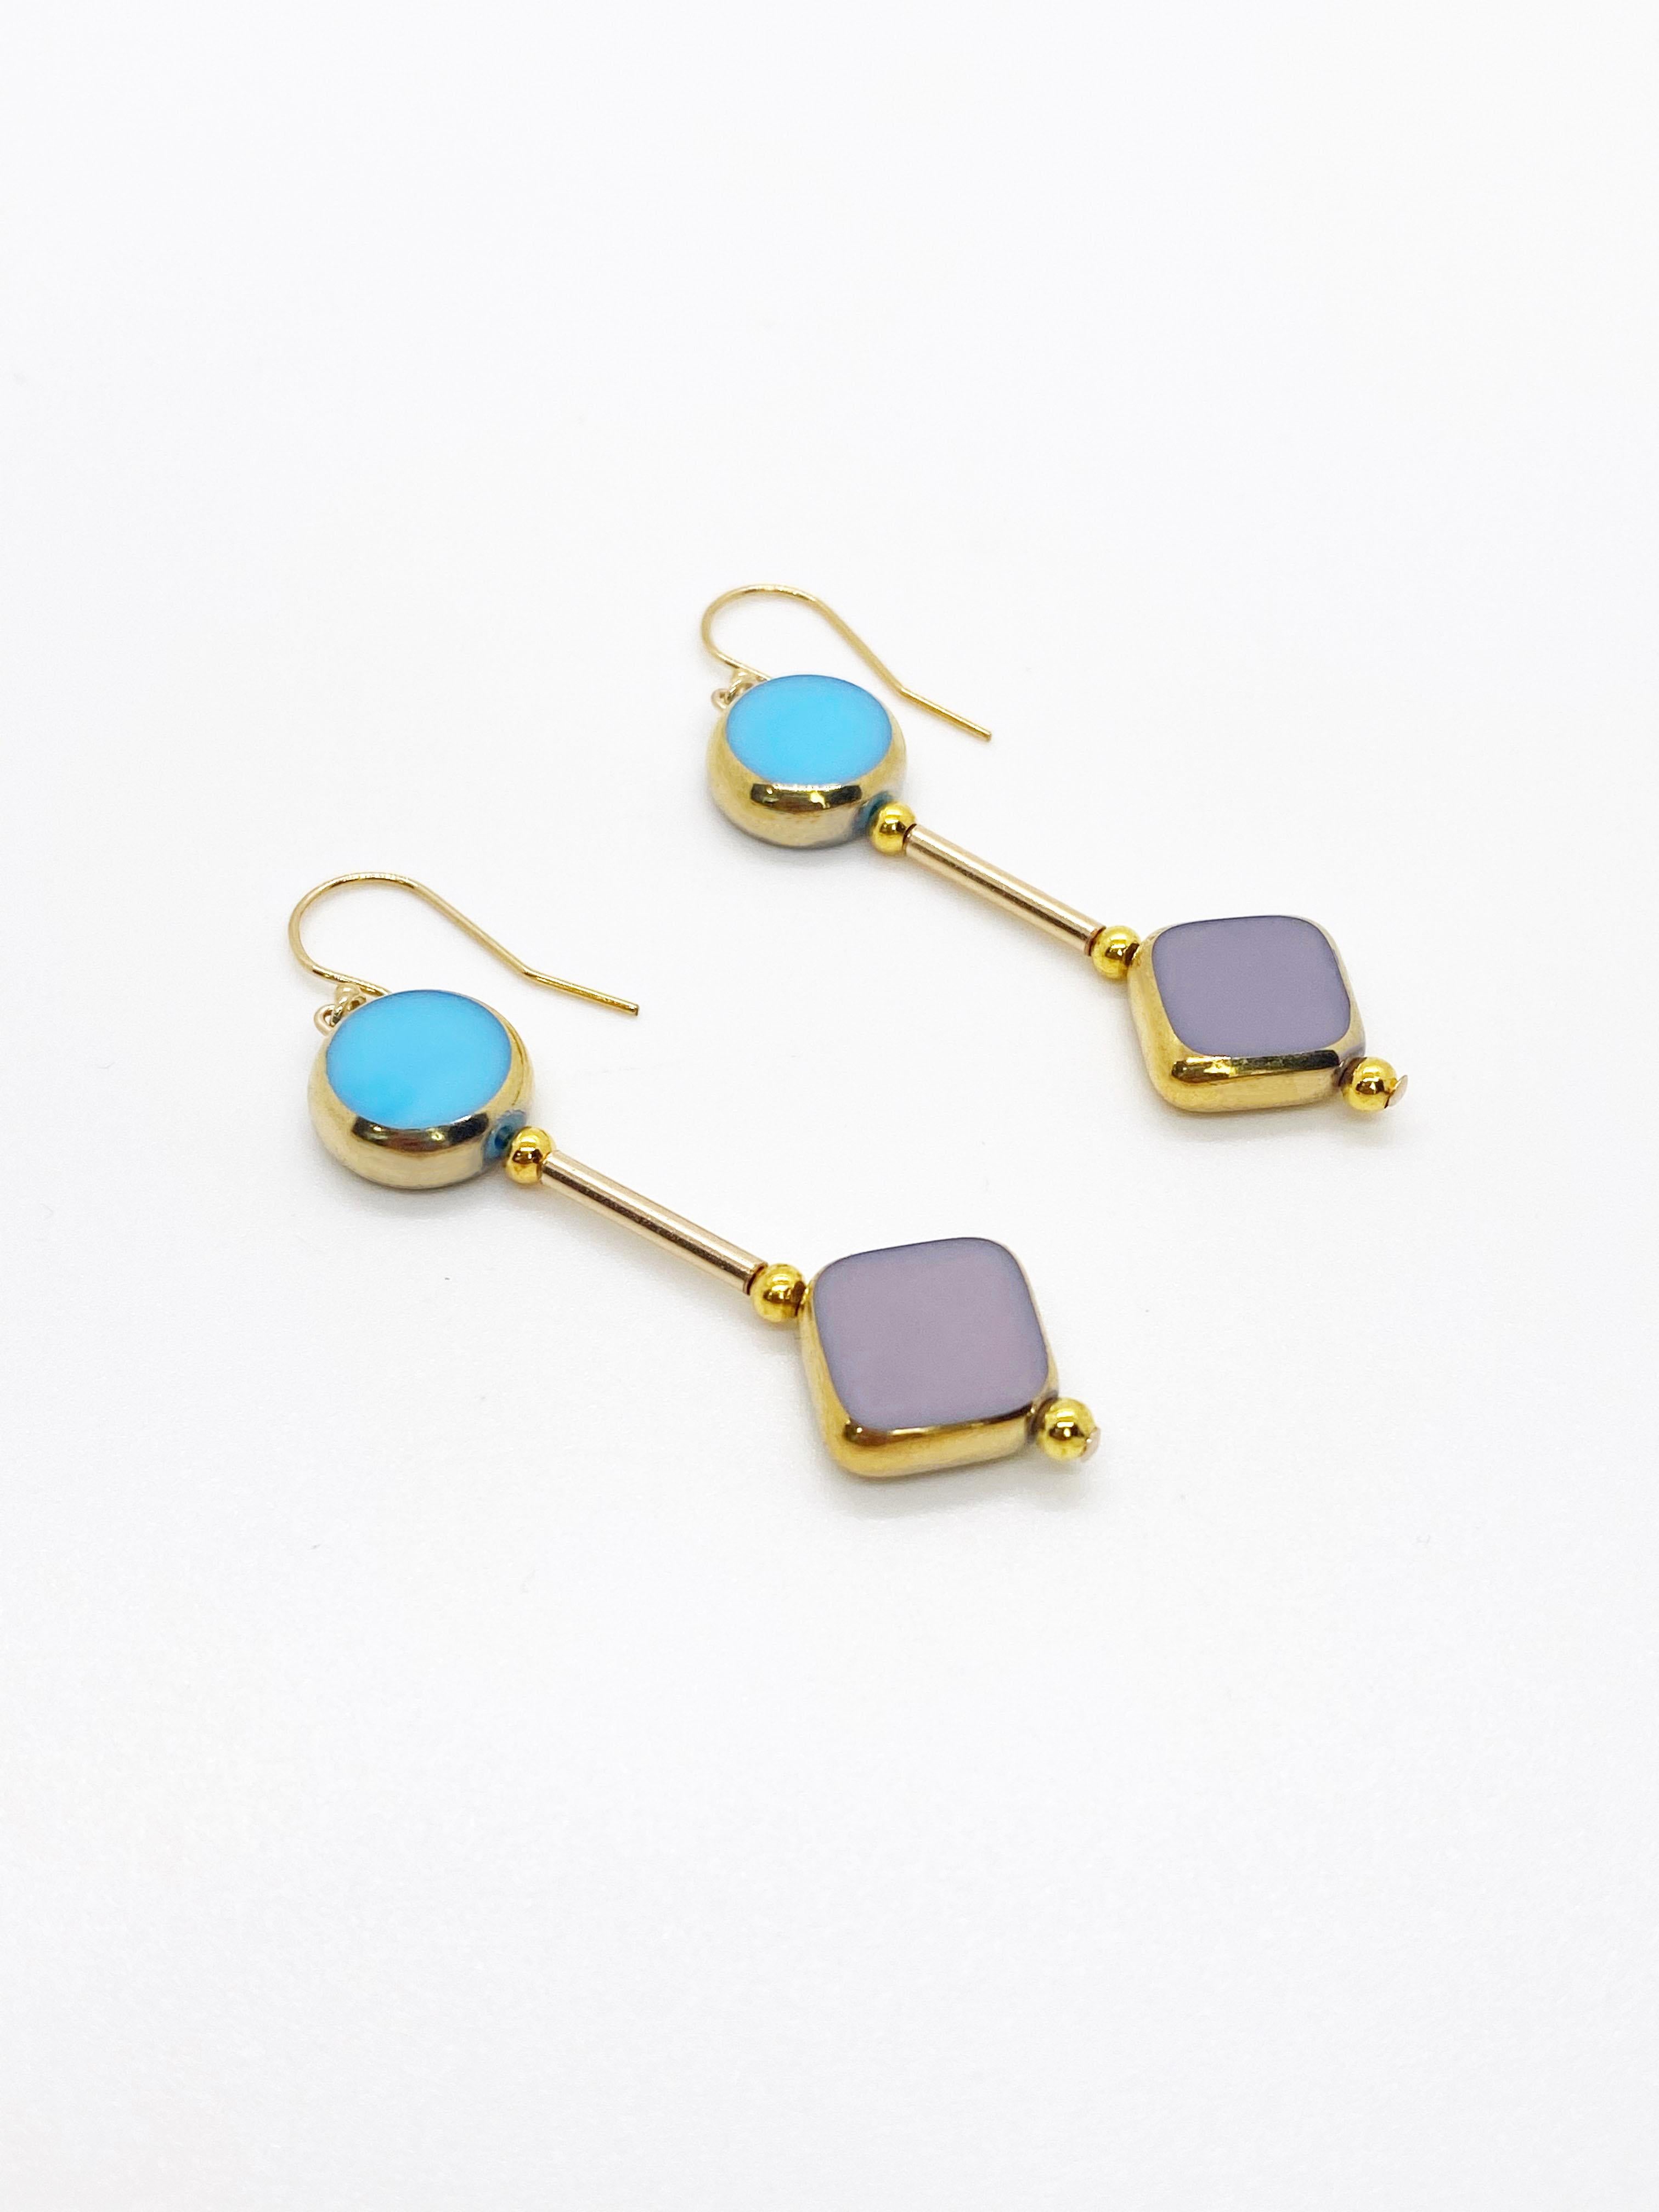 The pastel colors on these earrings are like no other. The beads are German vintage glass beads edged with 24K gold dangles on 14K gold filled metals and earring post.

The German vintage glass beads are considered rare and collectible, circa